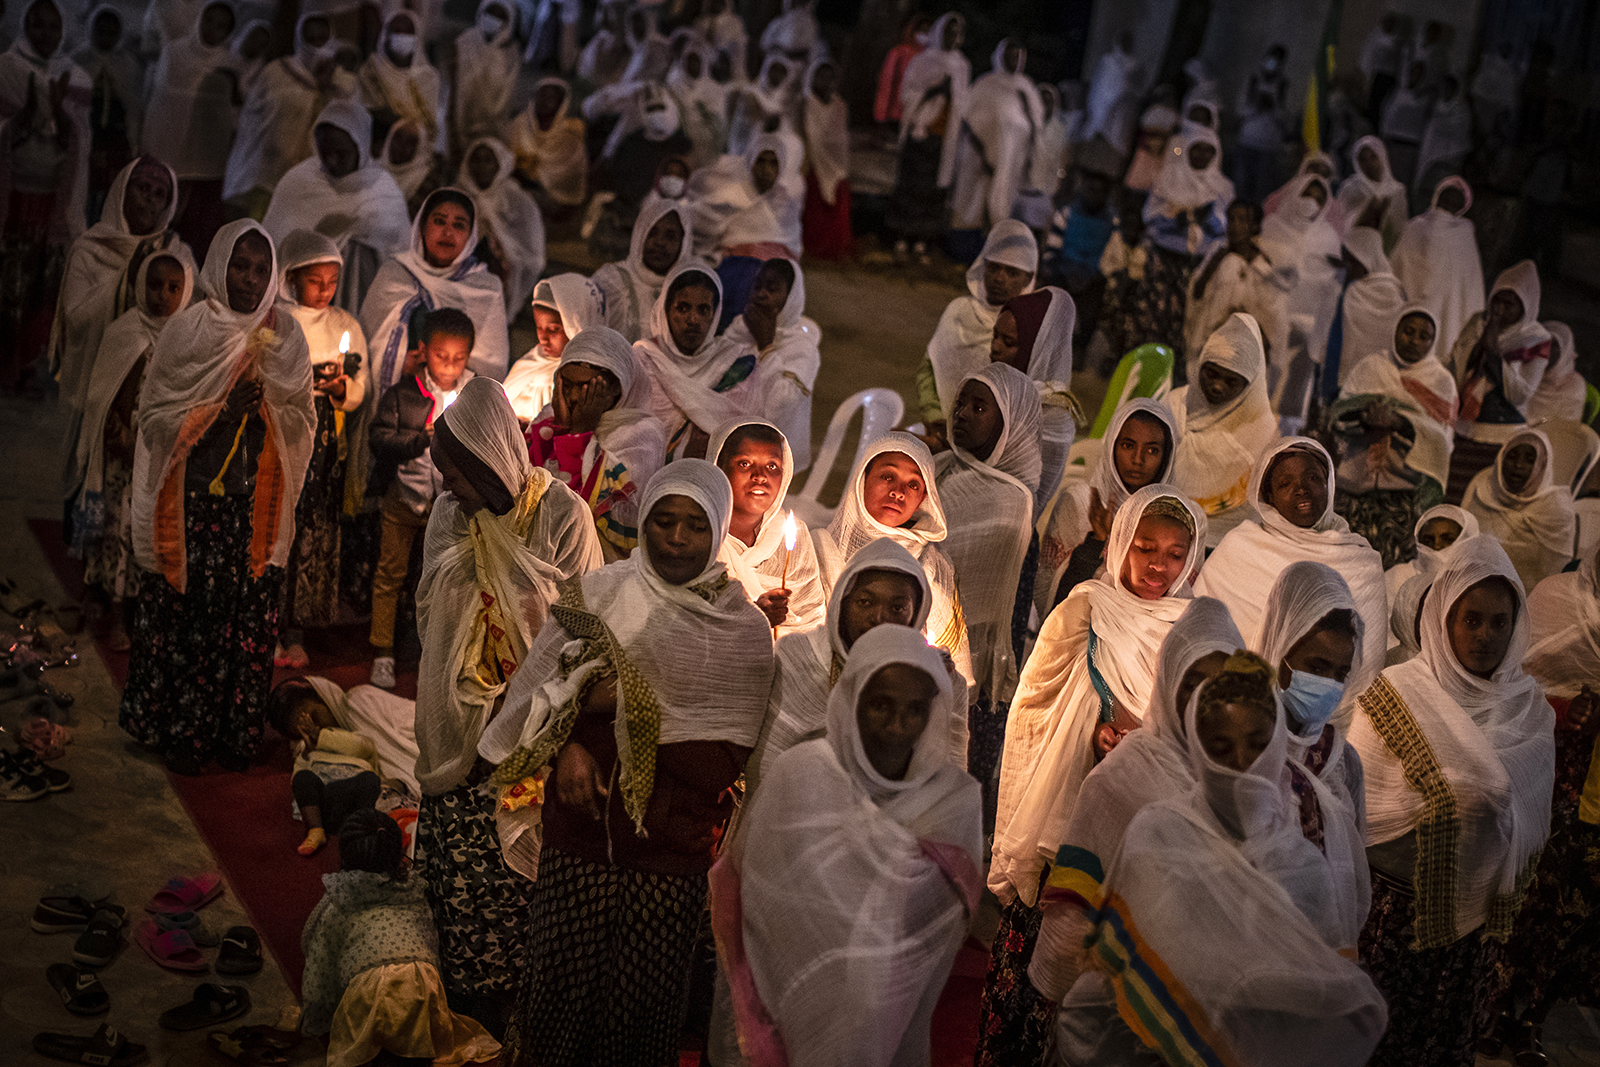 Ethiopian Orthodox Christians hold candles to celebrate Senay Mikael's Feast, or St. Michael's Day, as they listen to a sermon at St. Michael's Church in the Intoto neighborhood on the outskirts of Addis Ababa, in Ethiopia, Saturday June 19, 2021. In addition to celebrating the feast, the priests prayed for peace in the country and in the upcoming elections.  (AP Photo / Ben Curtis)